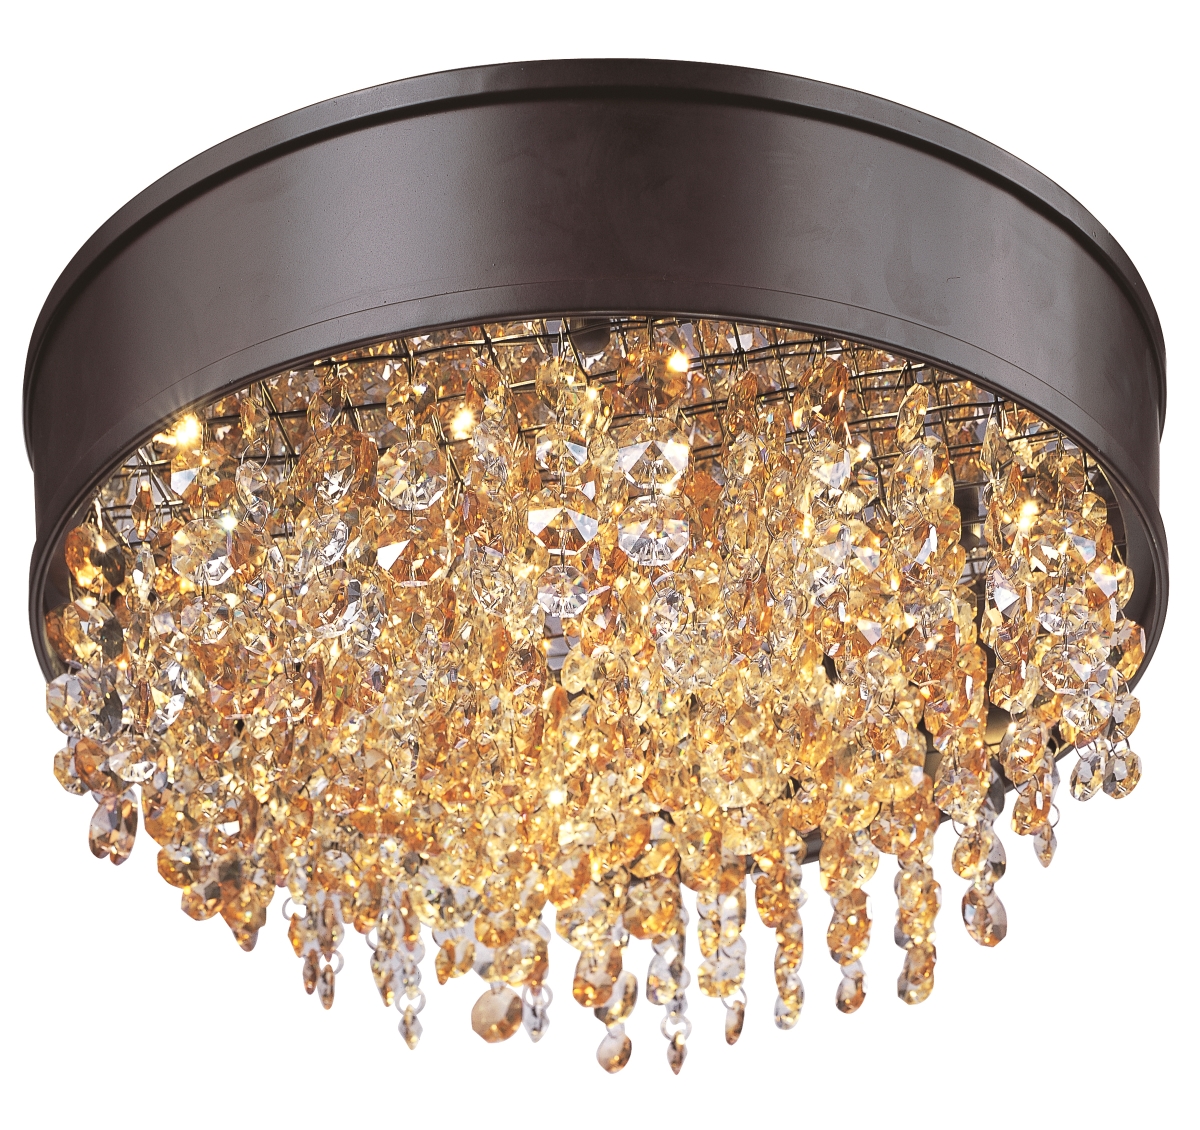 Picture of Maxim 39650SHBZ 6.25 in. Mystic 11 Light LED Flush Mount - Bronze